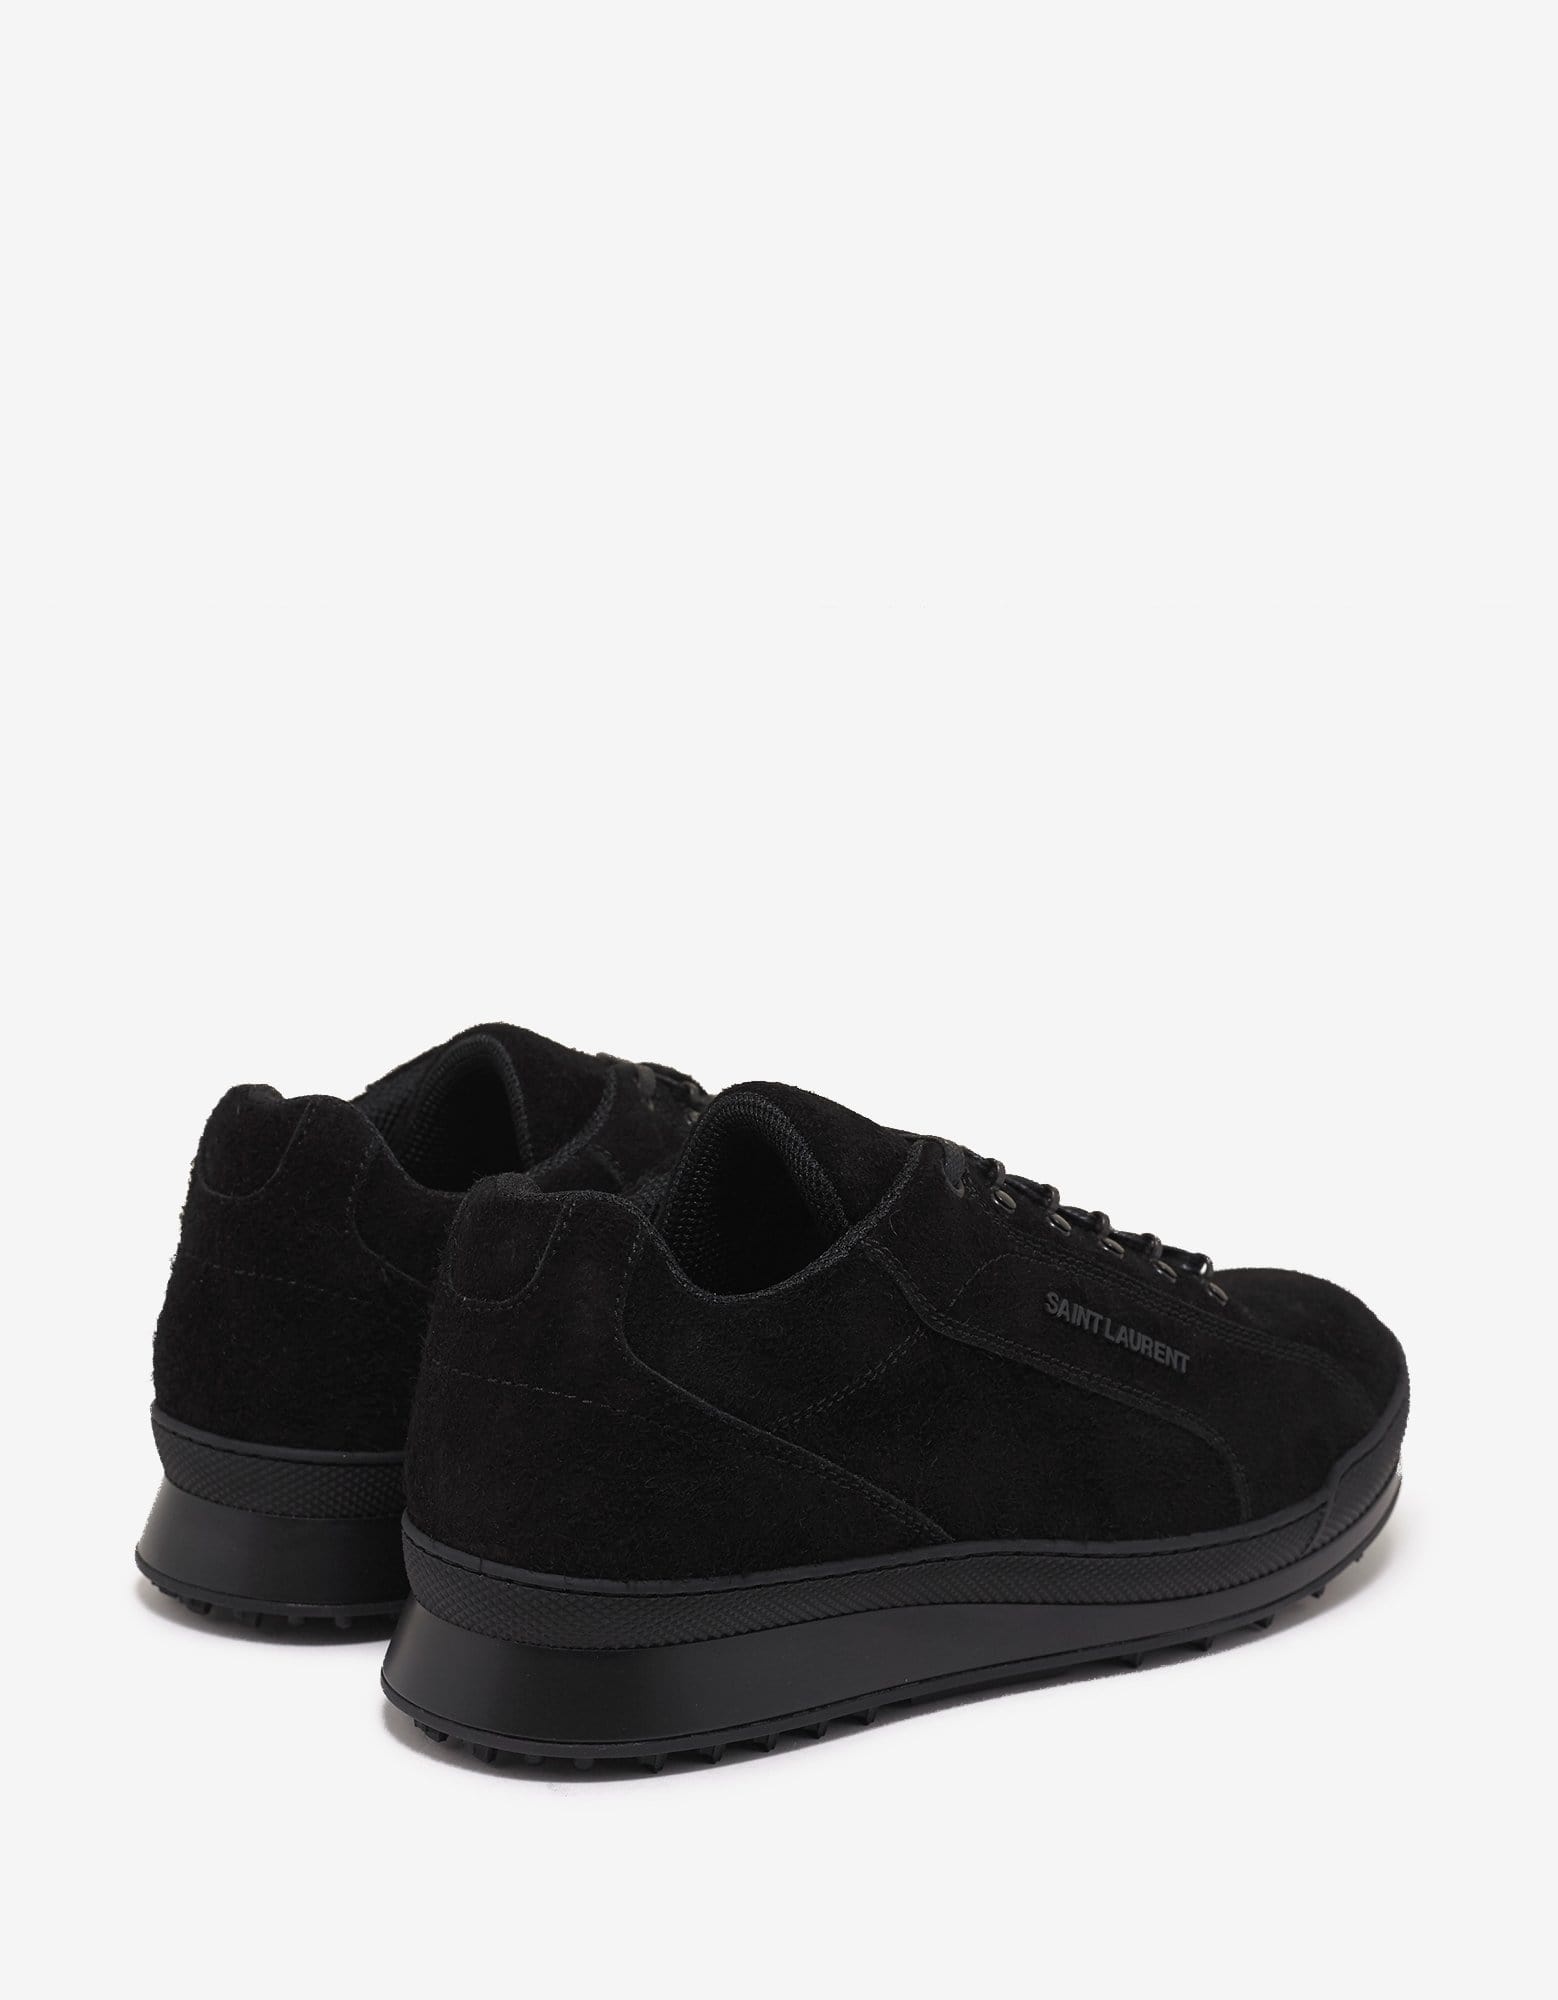 Black Suede Leather Jump Trainers - 6